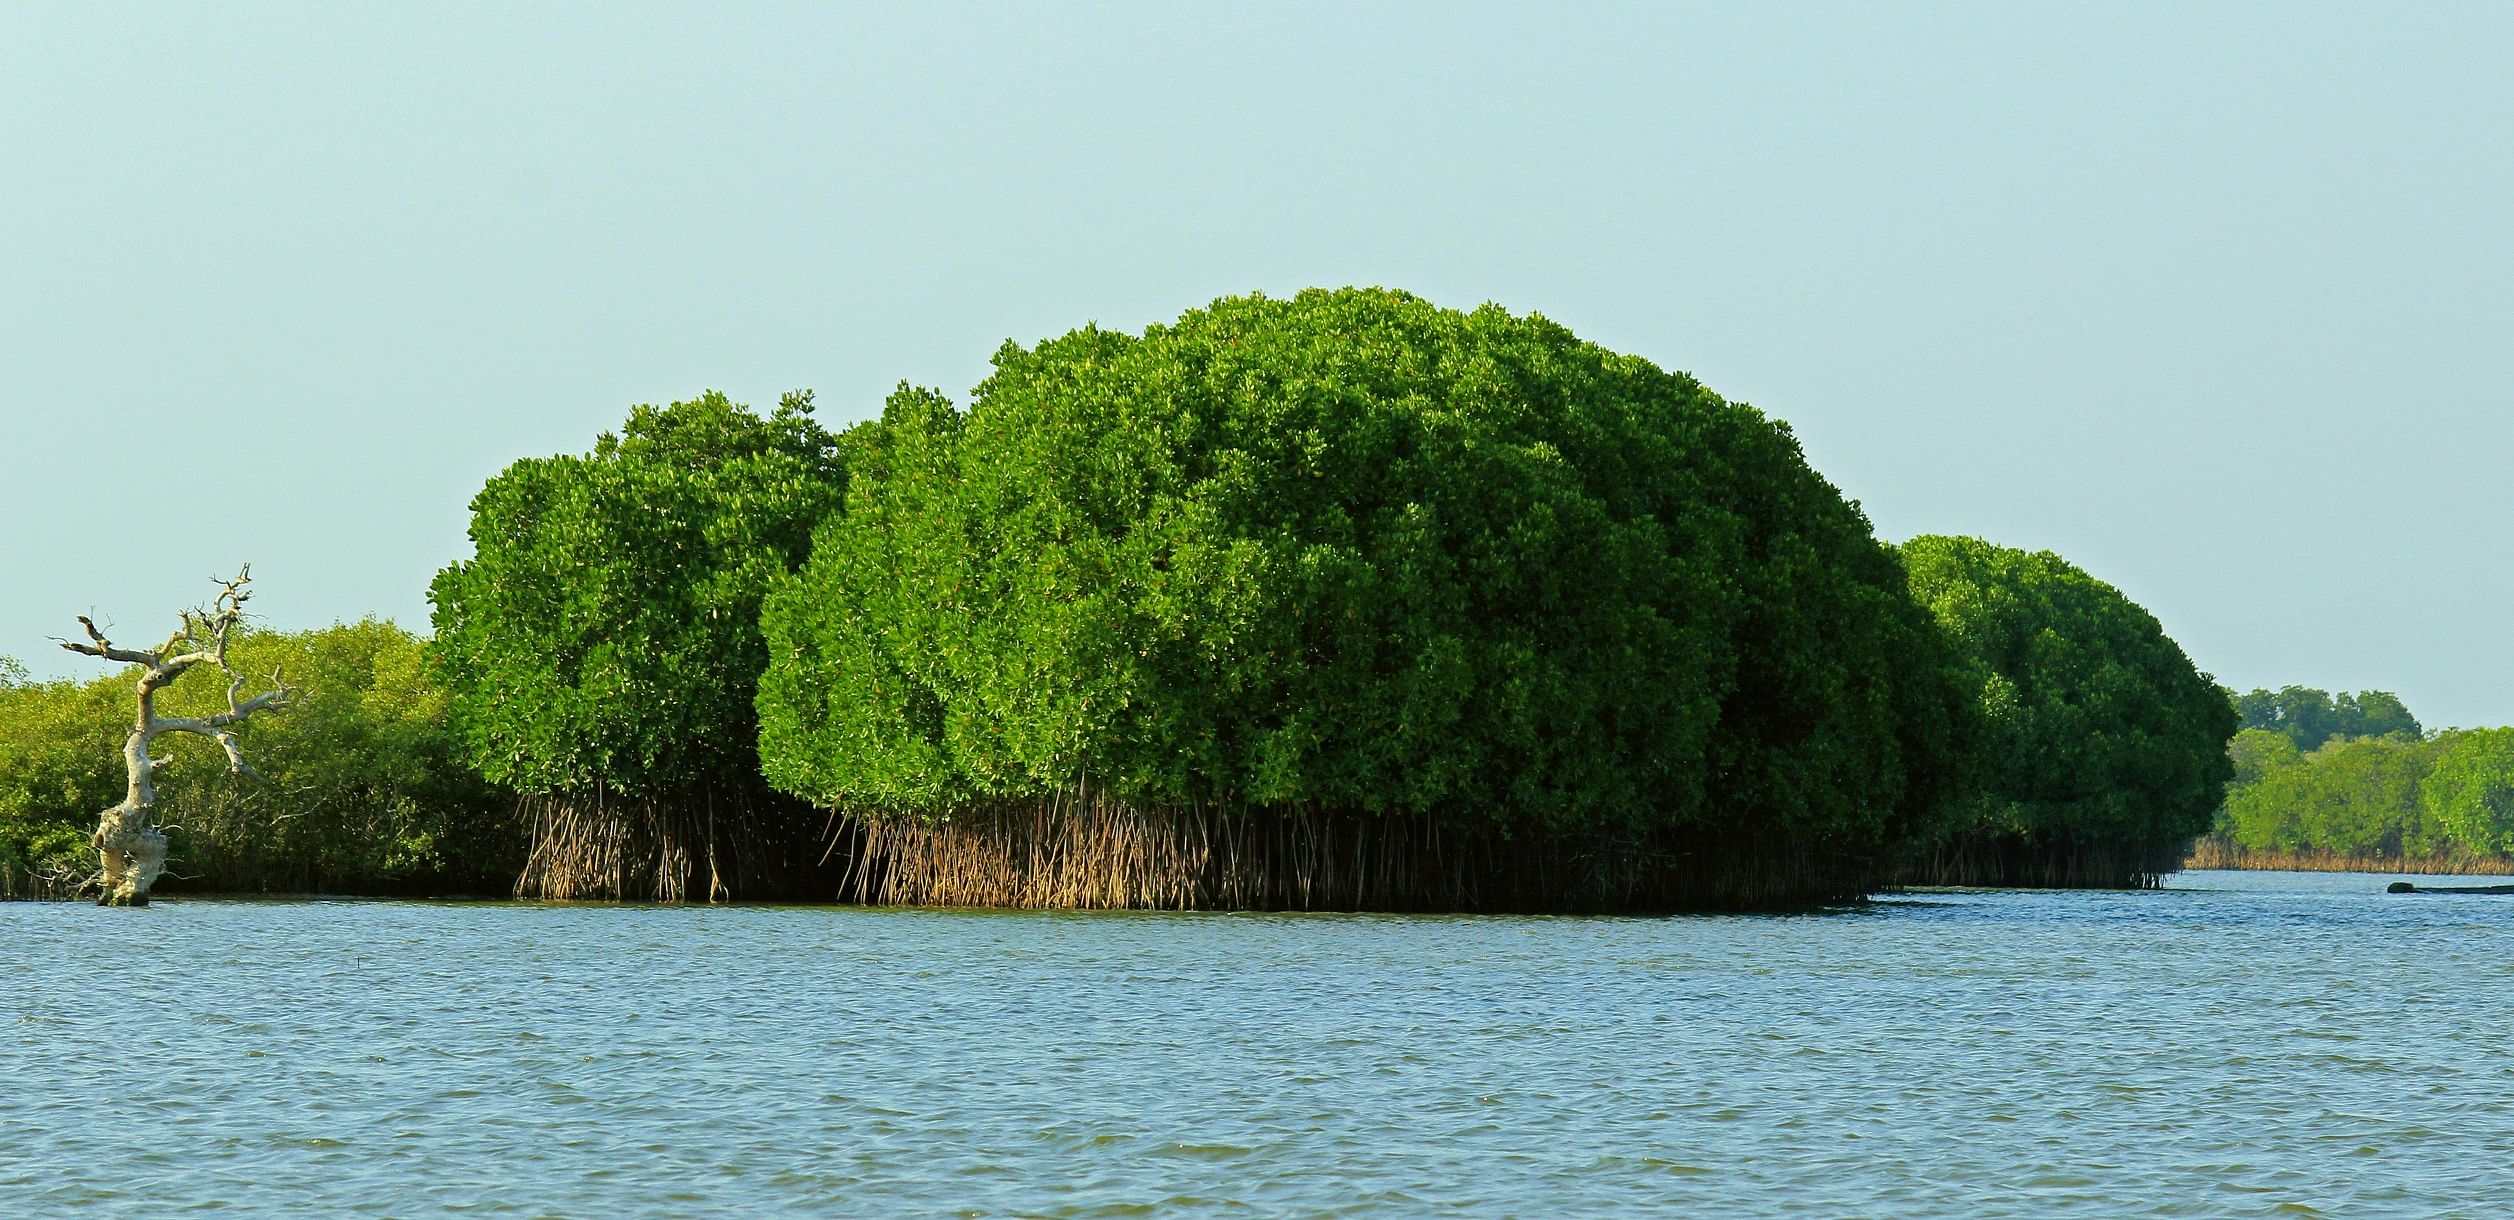 Holding it together: Pichavaram hosts the second largest mangrove forests in the world. Karthik Easvur/wikimedia commons